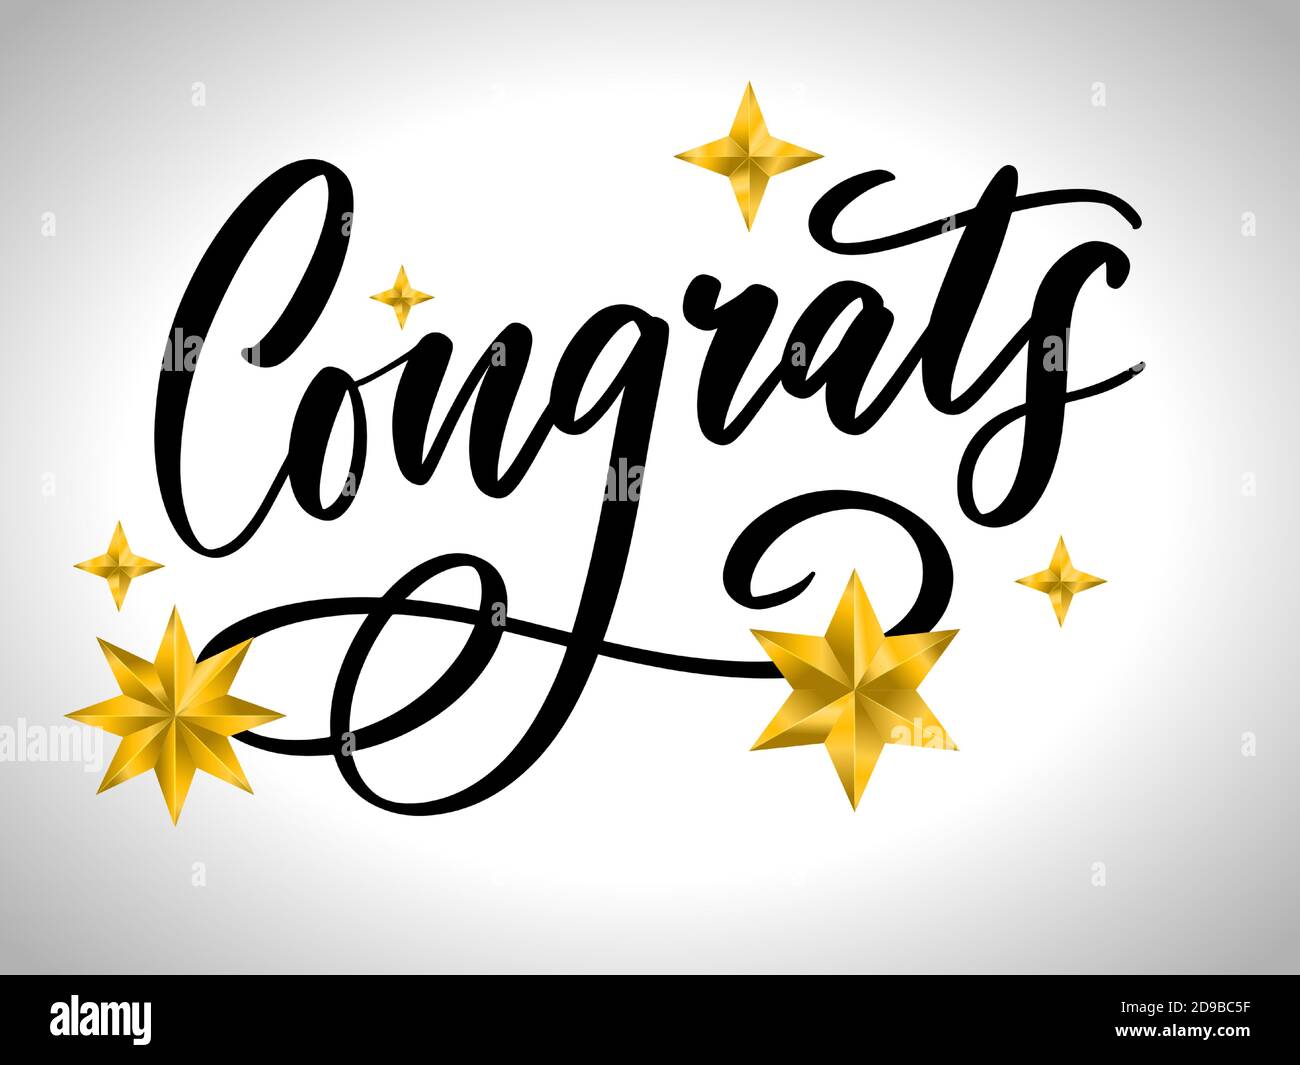 Congrats Congratulations card lettering calligraphy text Brush ...